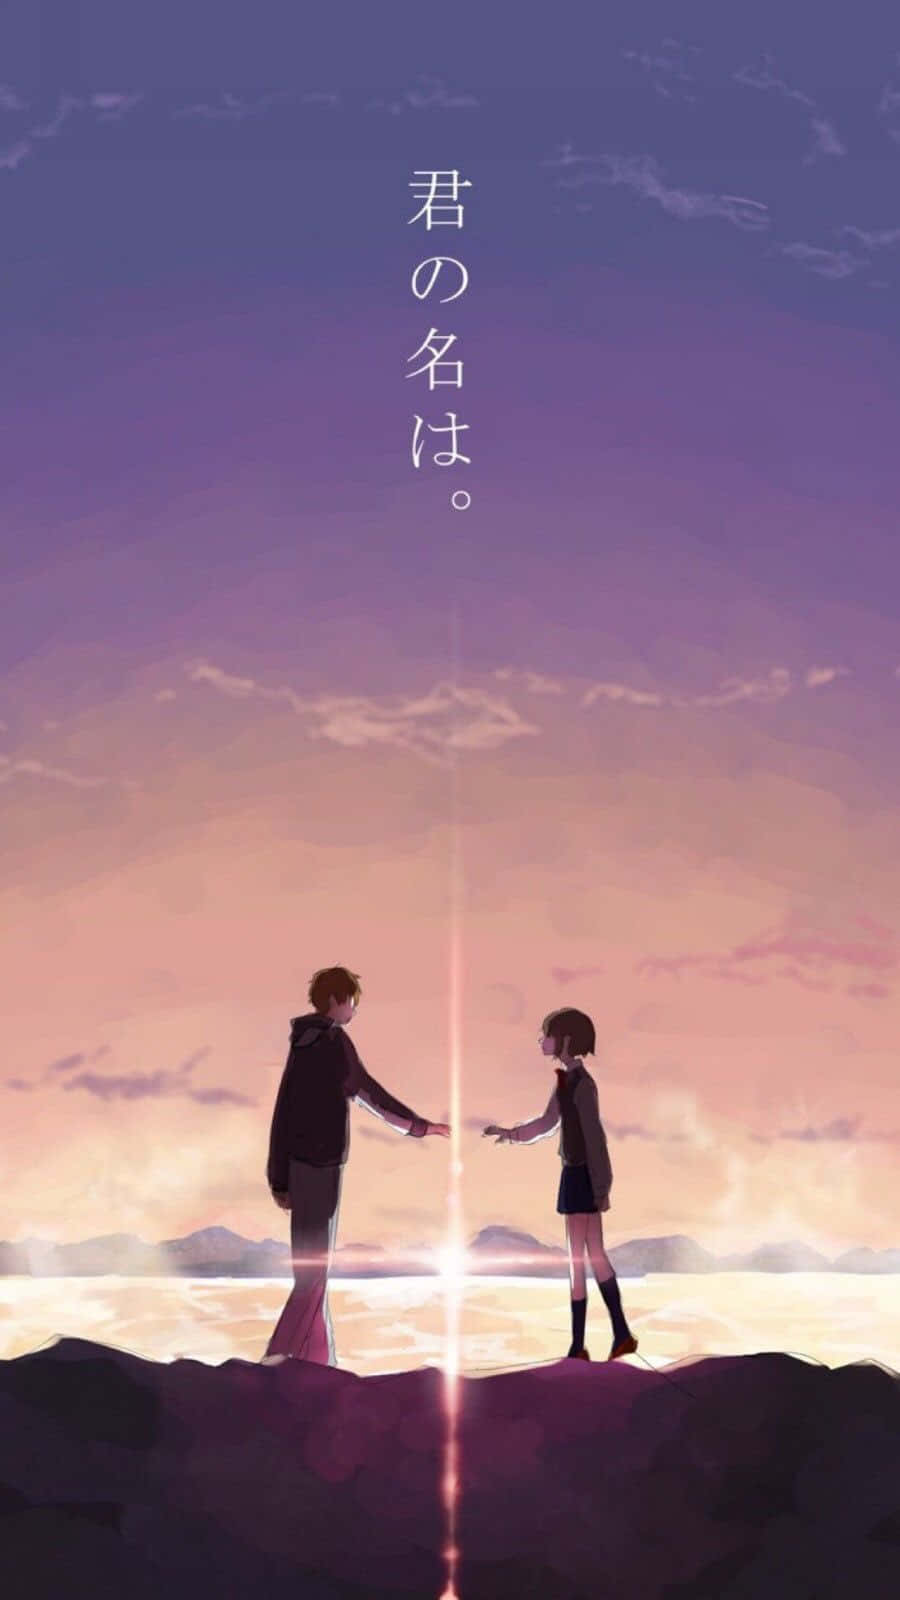 Your Name Japan Anime Silhouette Wallpaper